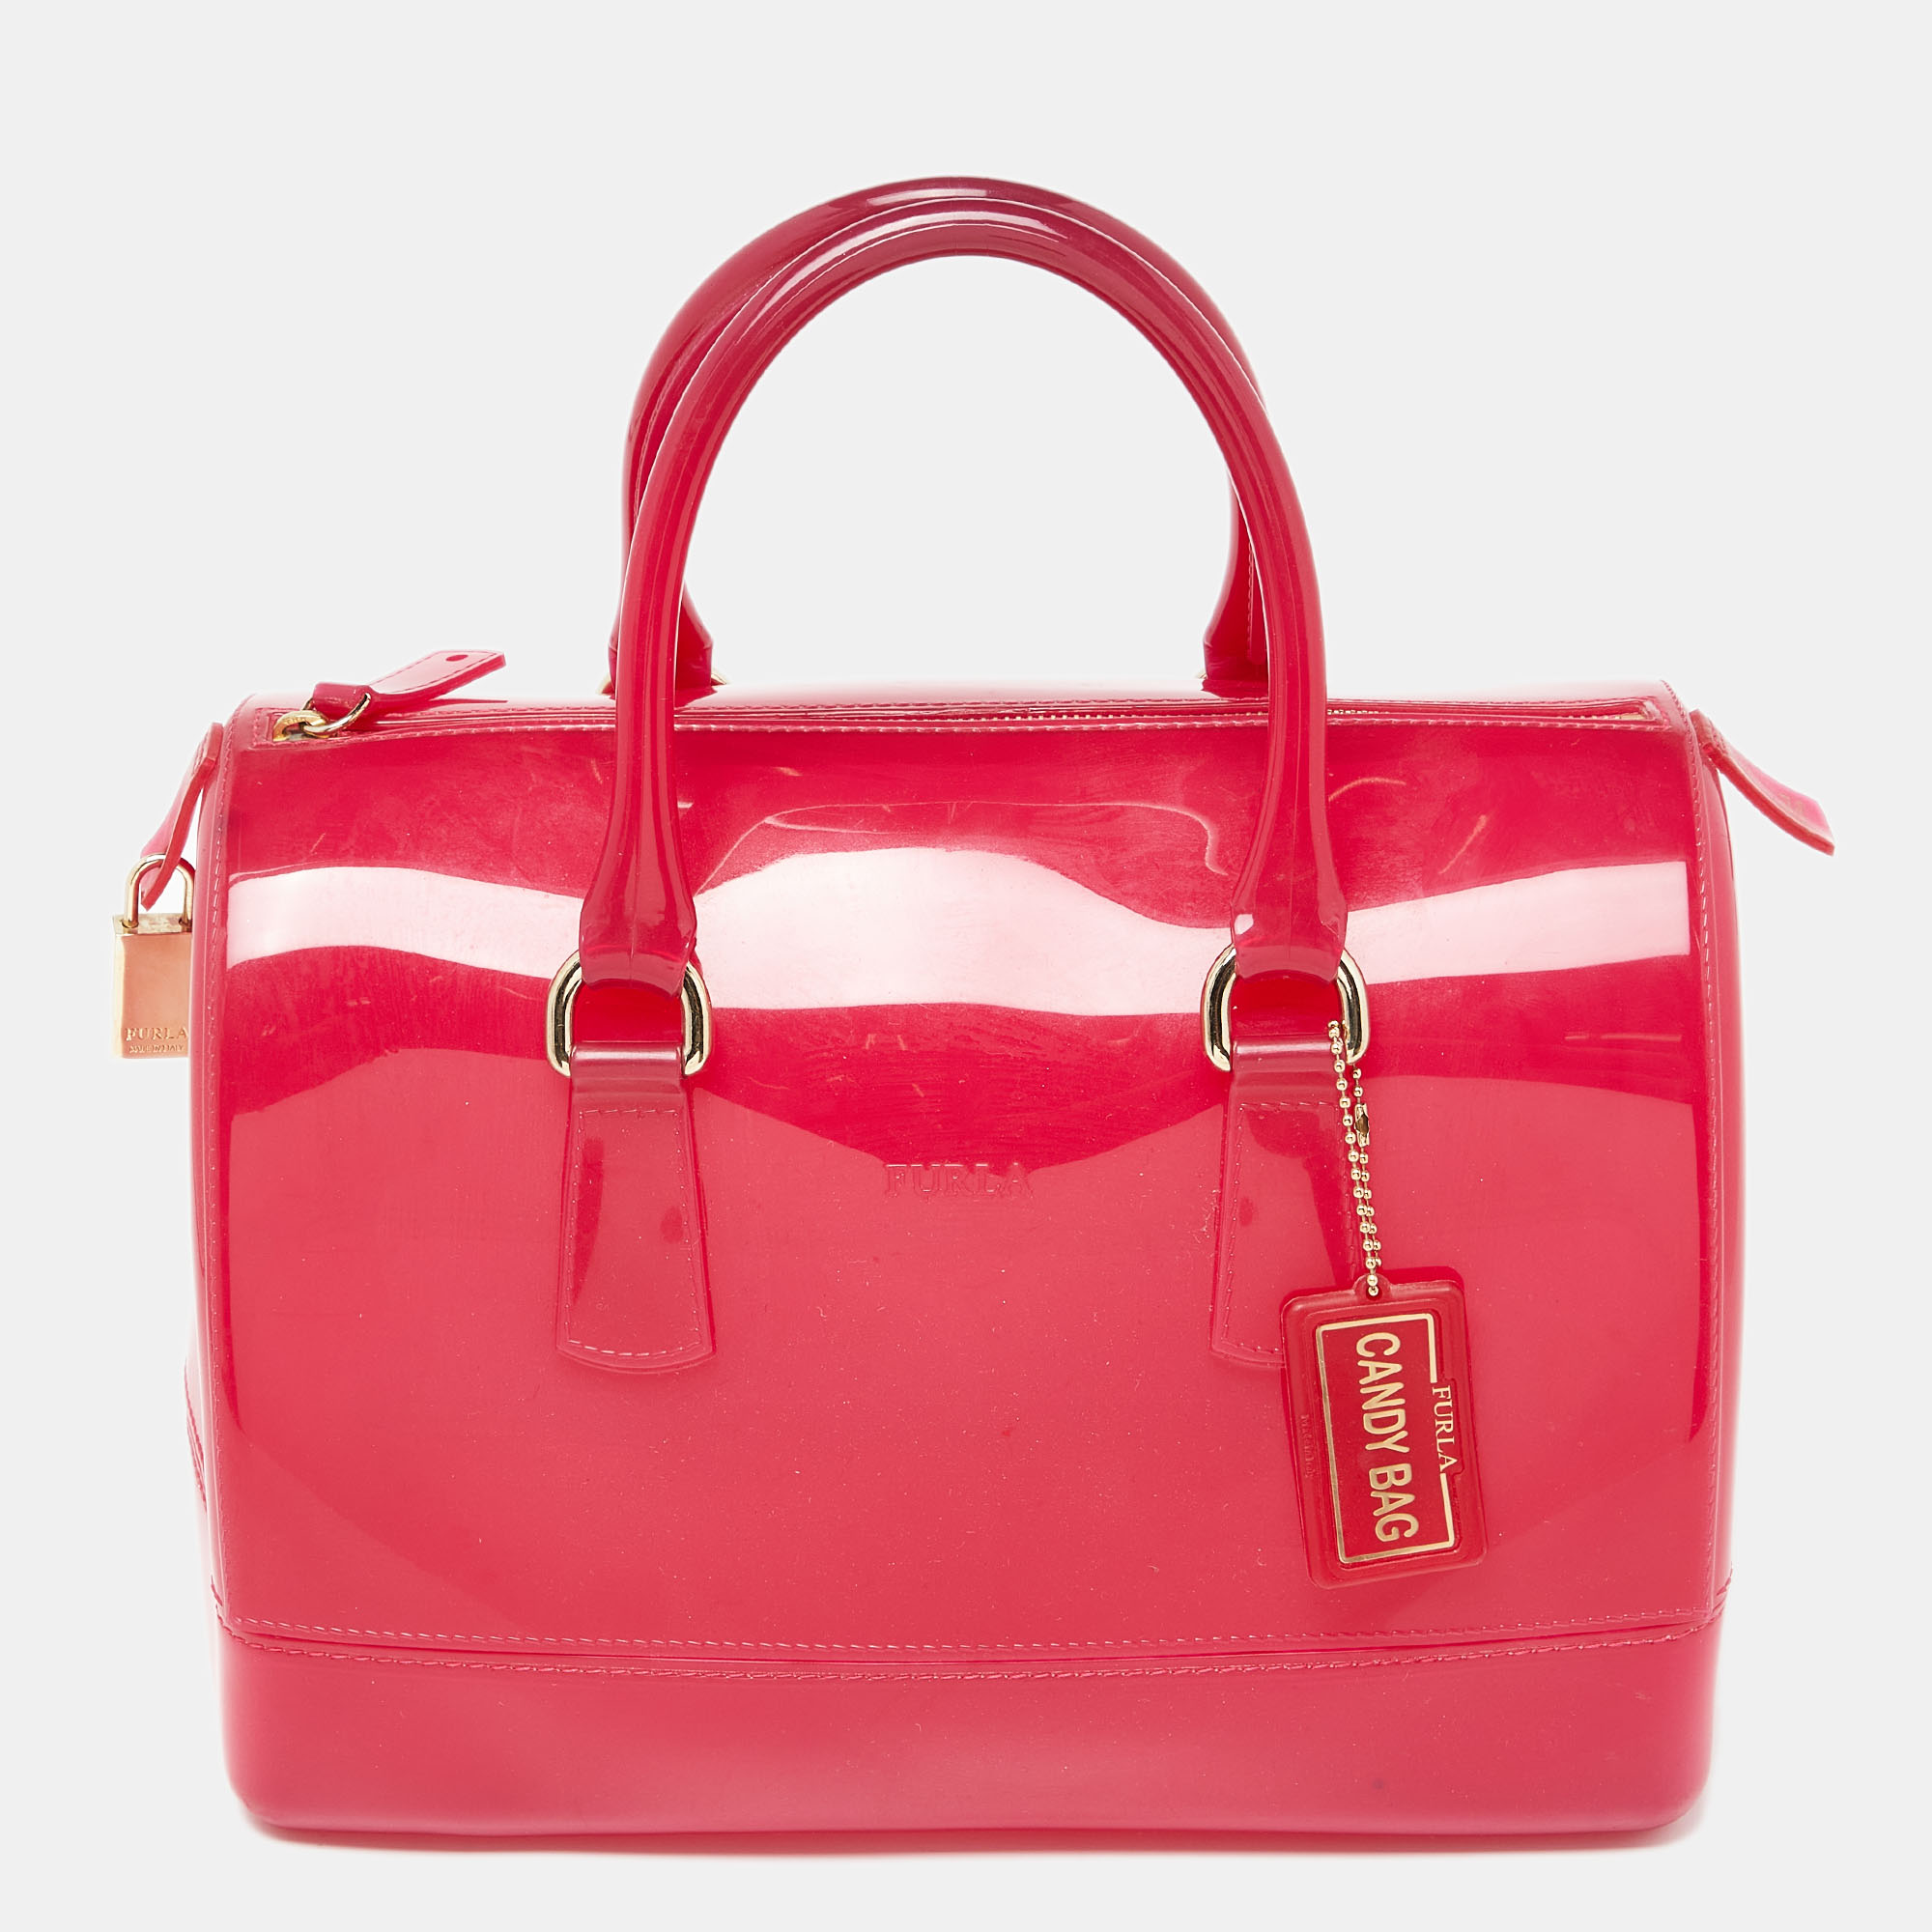 Pre-owned Furla Pink Rubber Candy Satchel